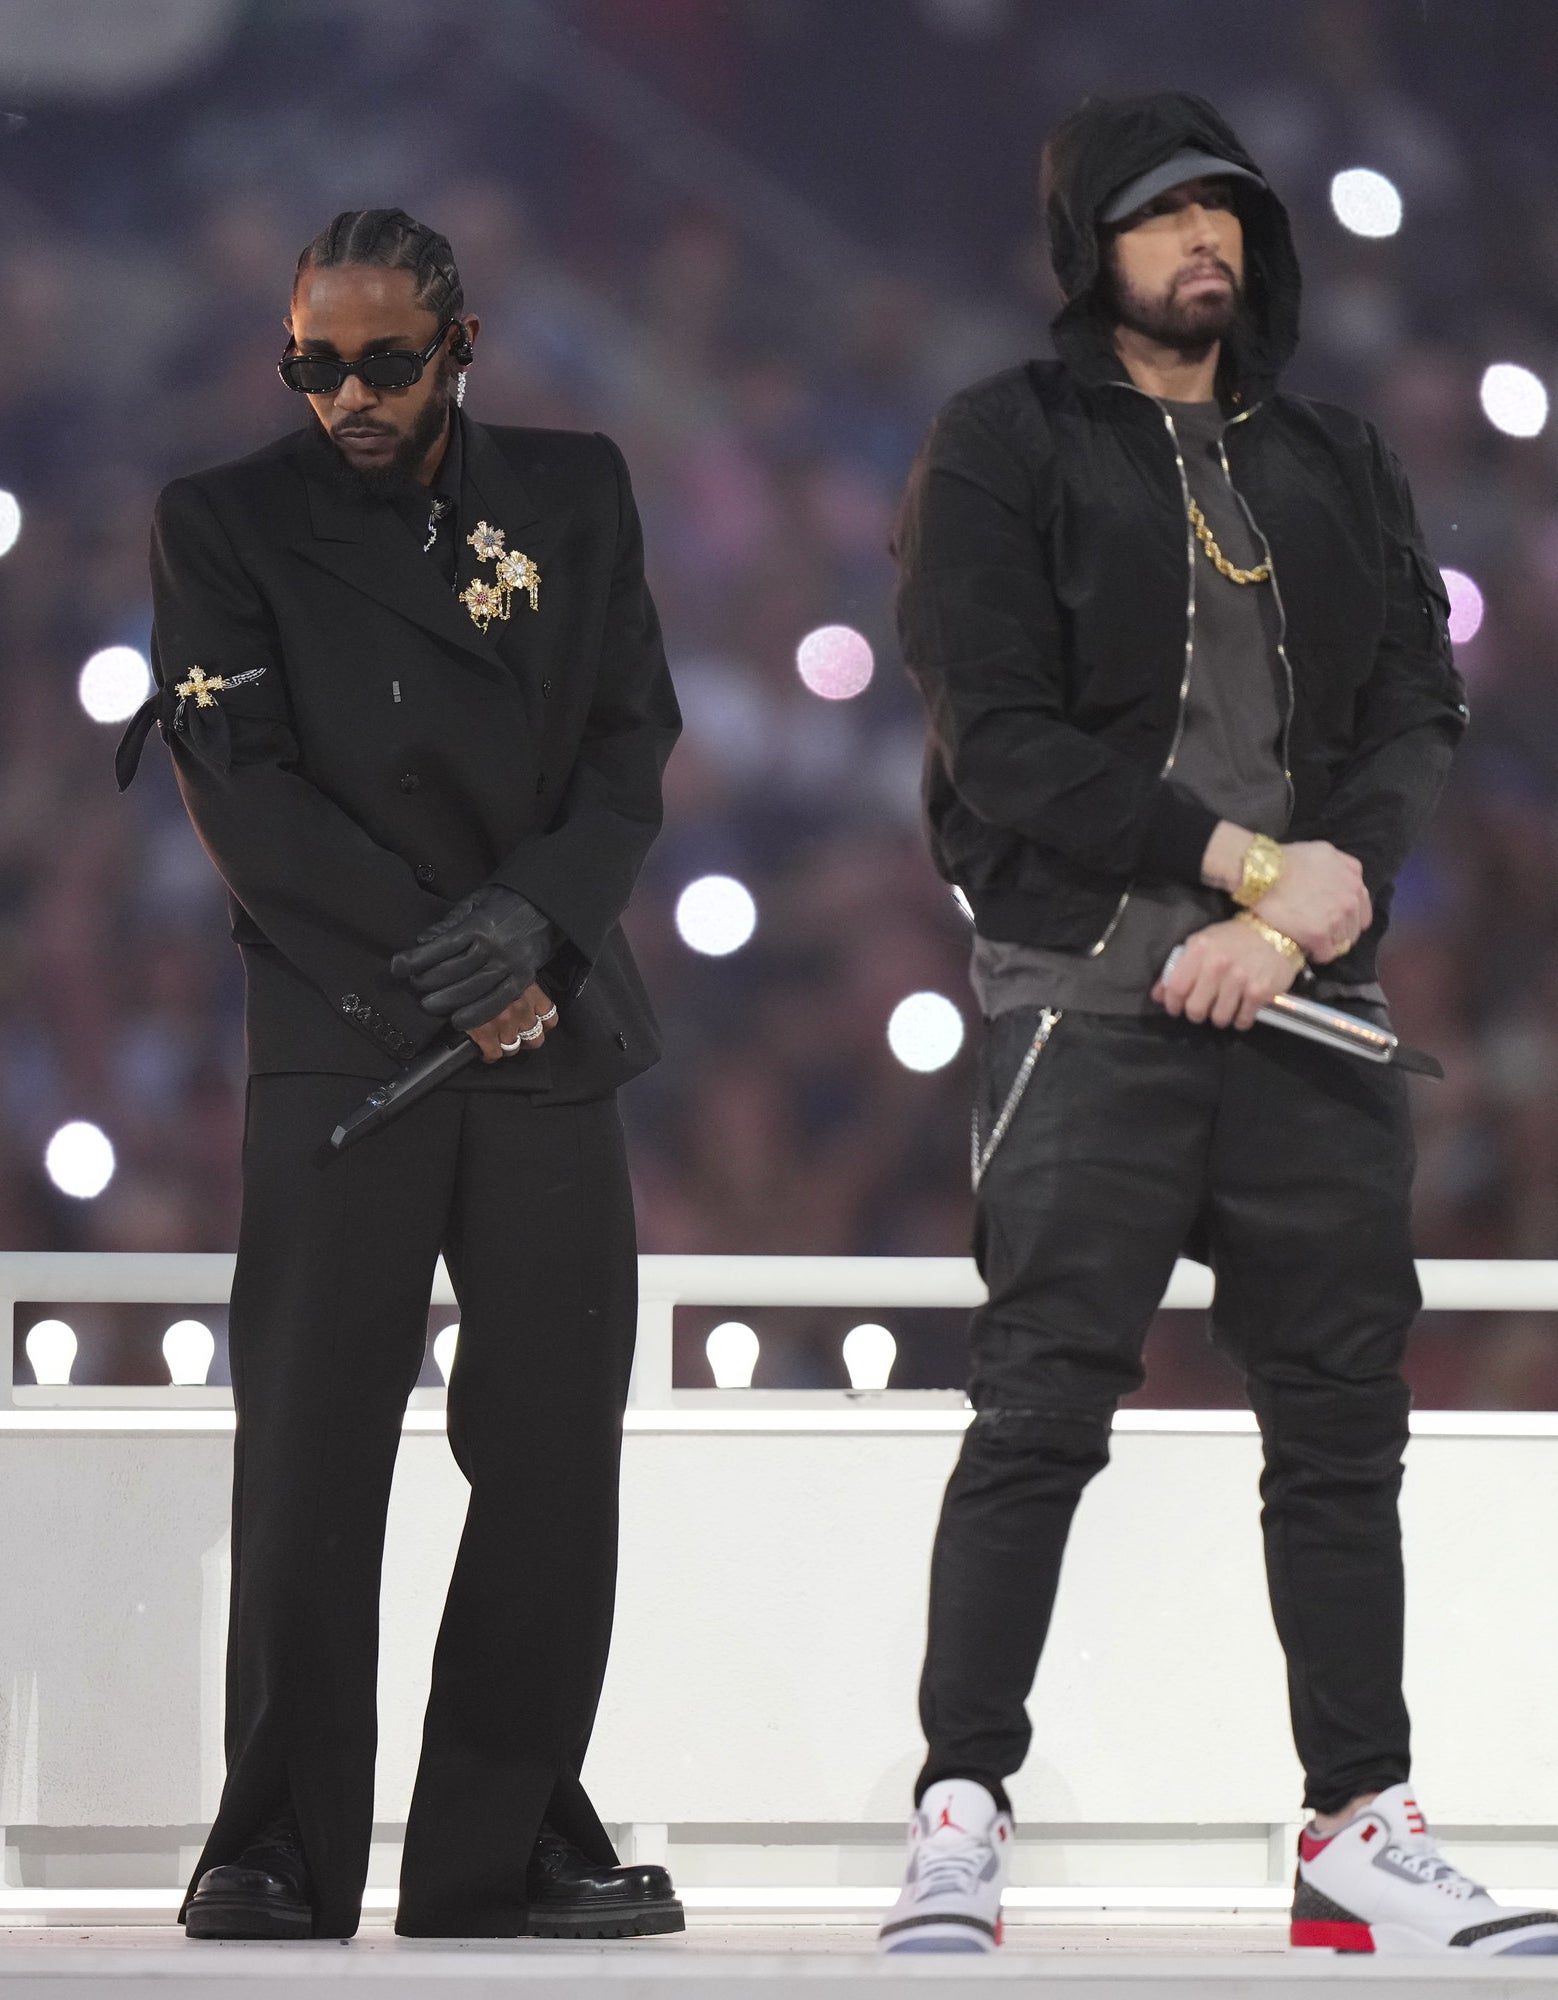 Kendrick Lamar performs in the Pepsi Halftime Show during the NFL Super Bowl LVI football game